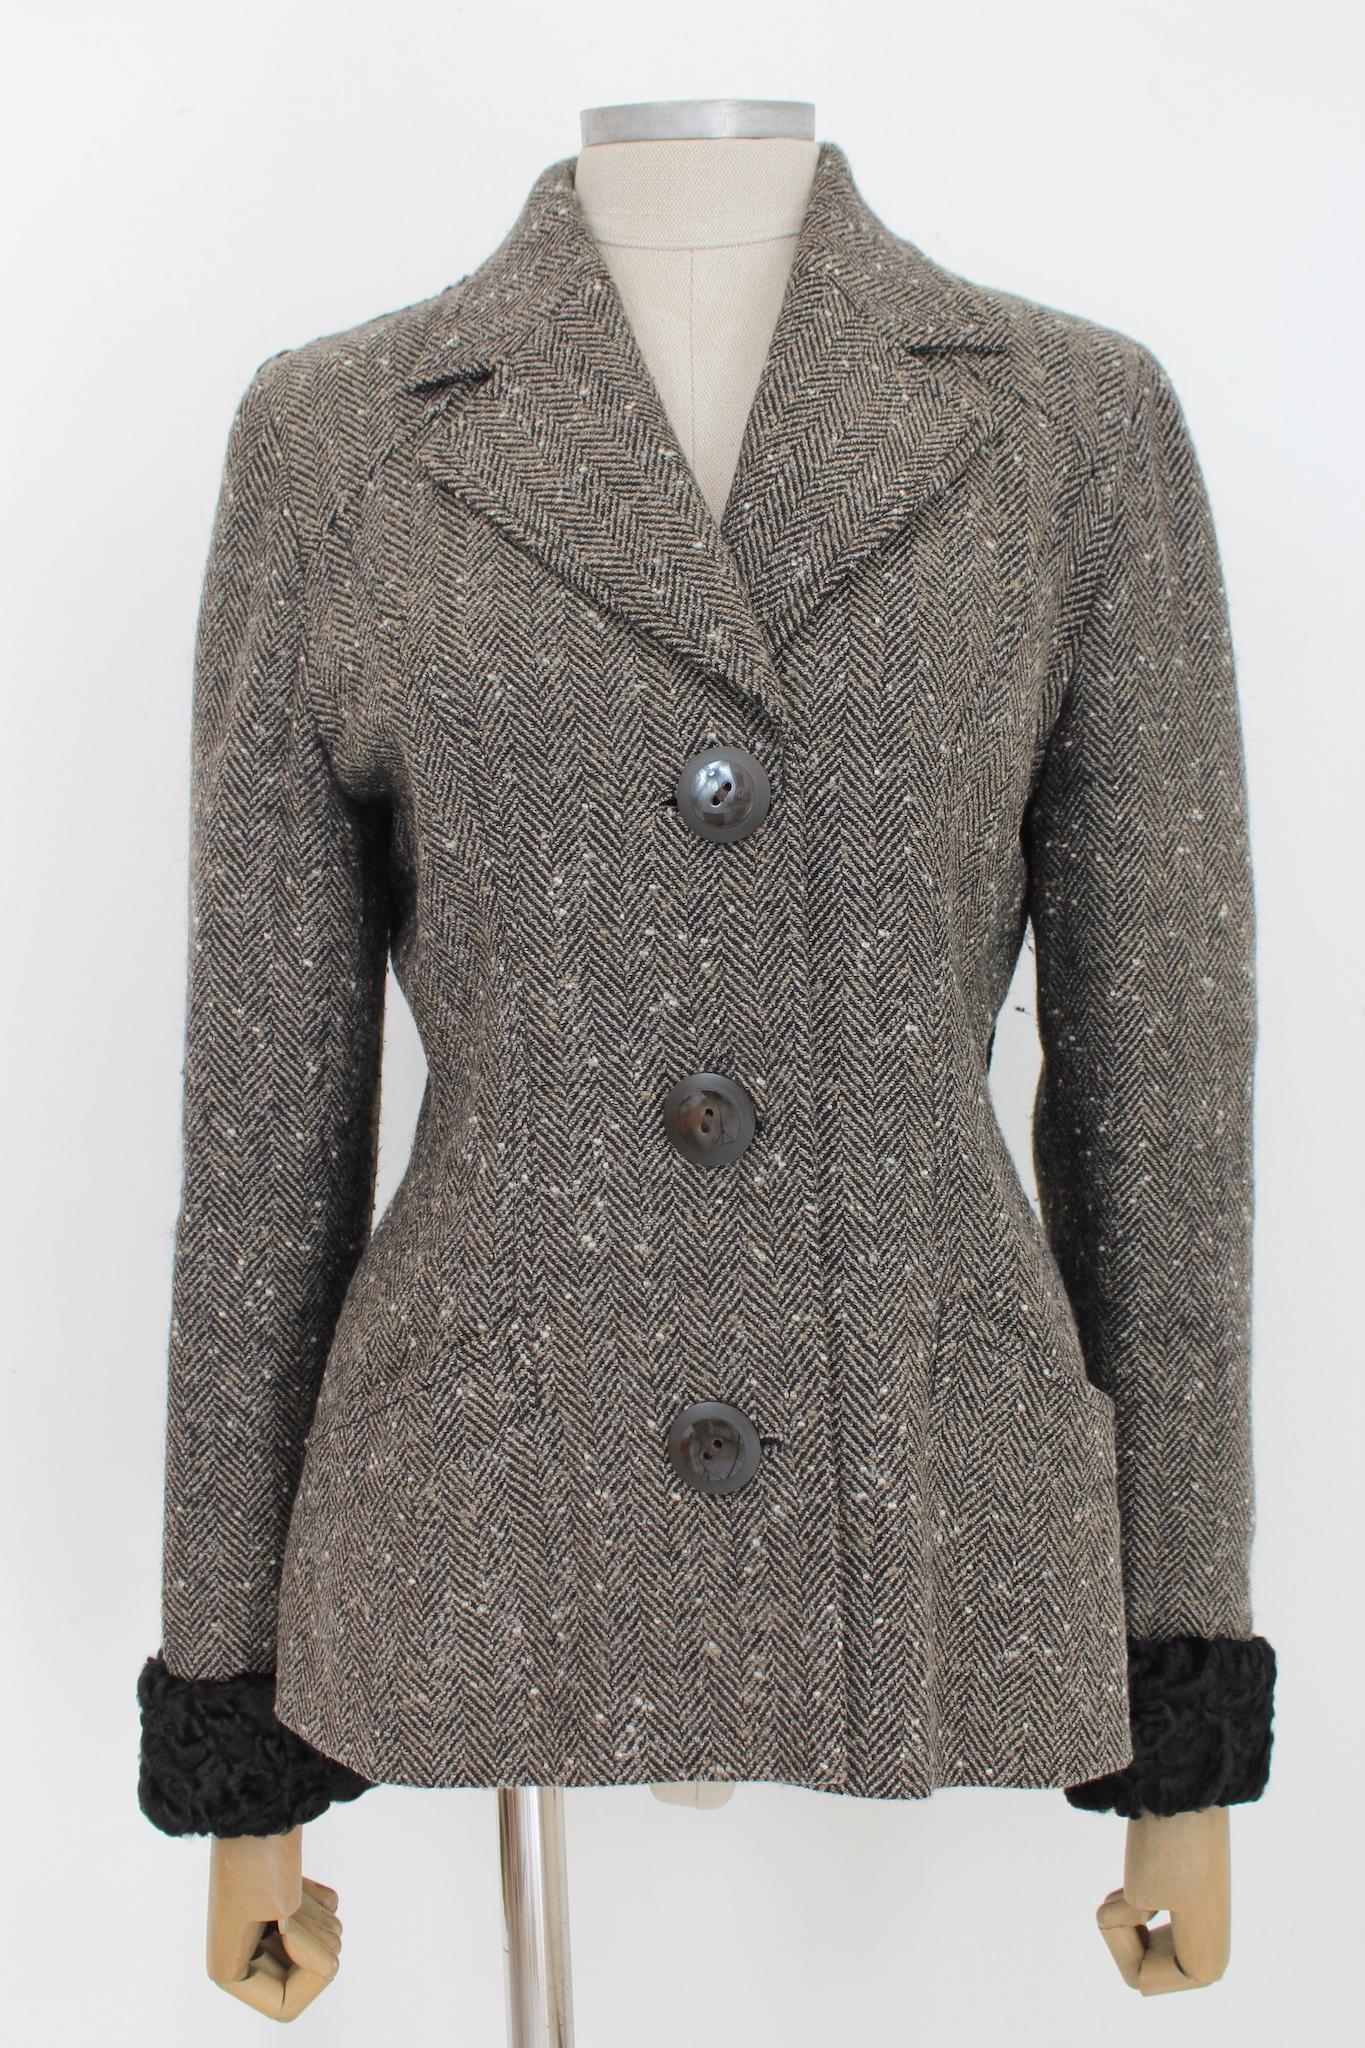 Gai Mattiolo 90s vintage jacket in wool and Astrakhan. Fitted model, black and white with herringbone pattern, cuffs and shoulder in Astrakhan. Fabric 86% wool, 14% polyamide, internally lined. Made in Italy.

Size: 46 It 12 Us 14 Uk

Shoulder: 46